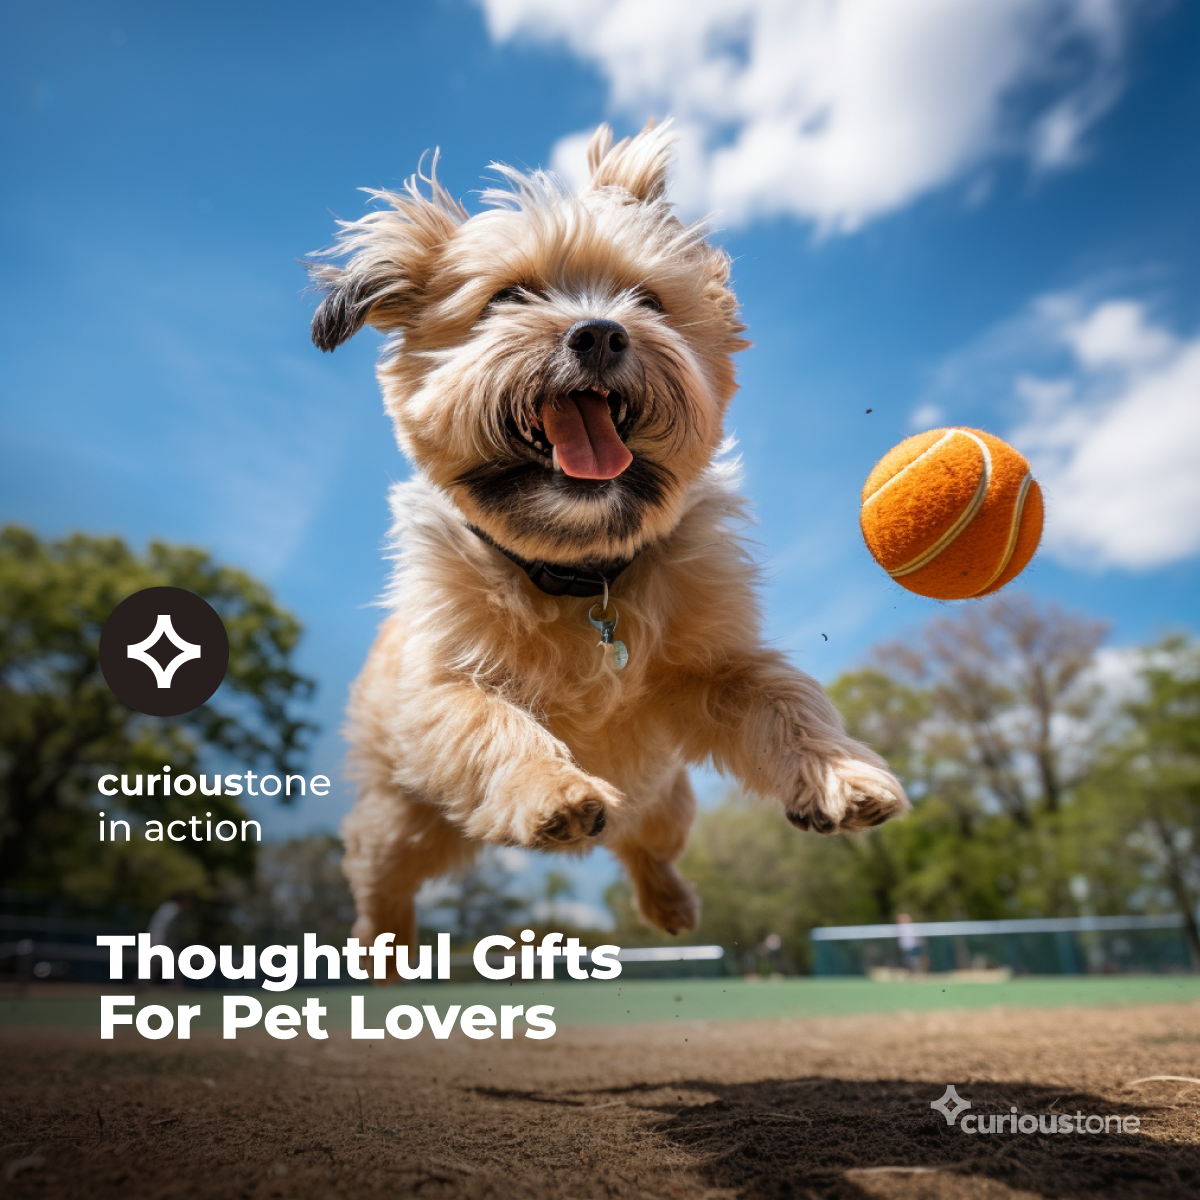 curioustone pet gifts